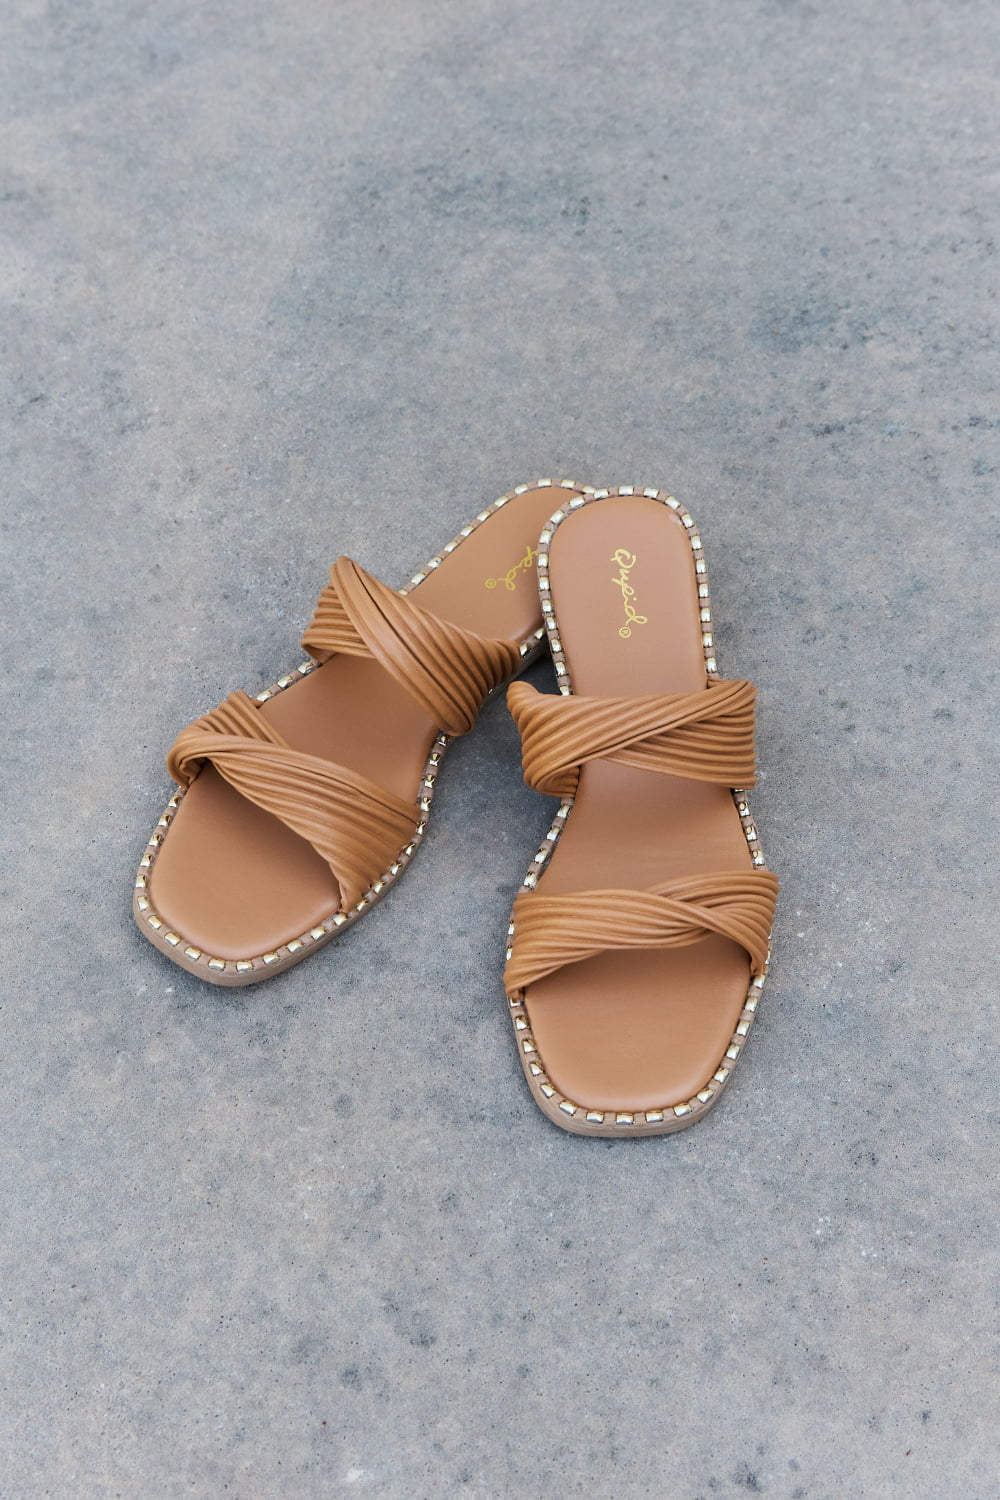 Double Strap Twist Sandals Shoes RYSE Clothing Co.   